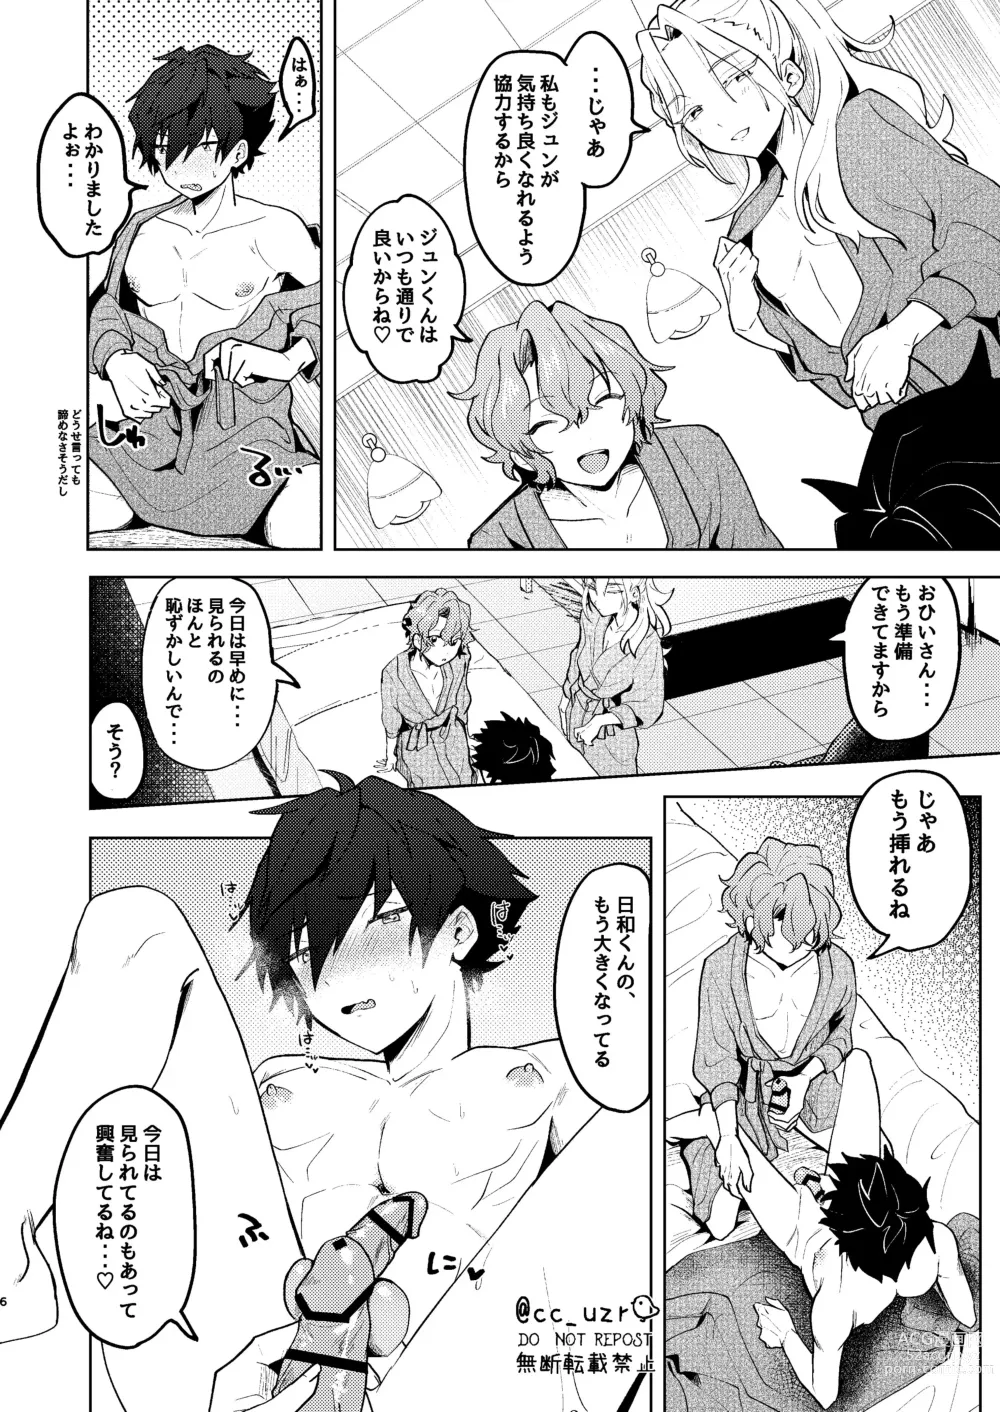 Page 5 of doujinshi ROSIEST